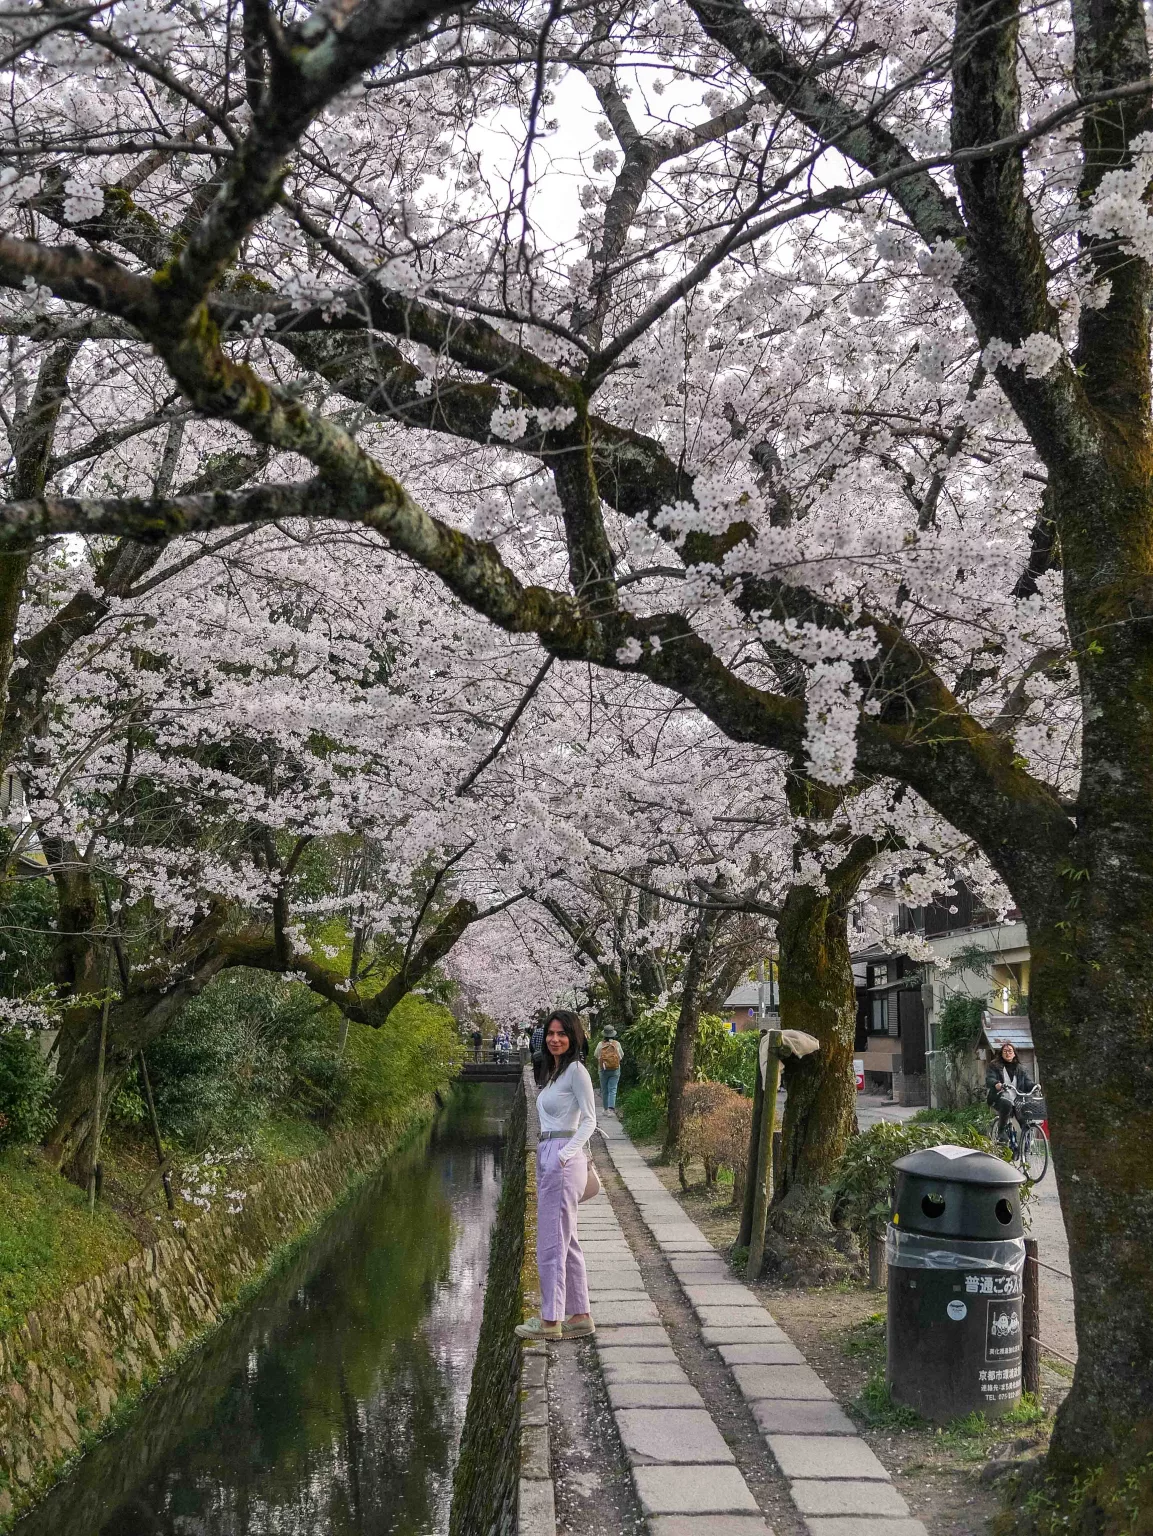 Best cherry Blossom spots in Kyoto